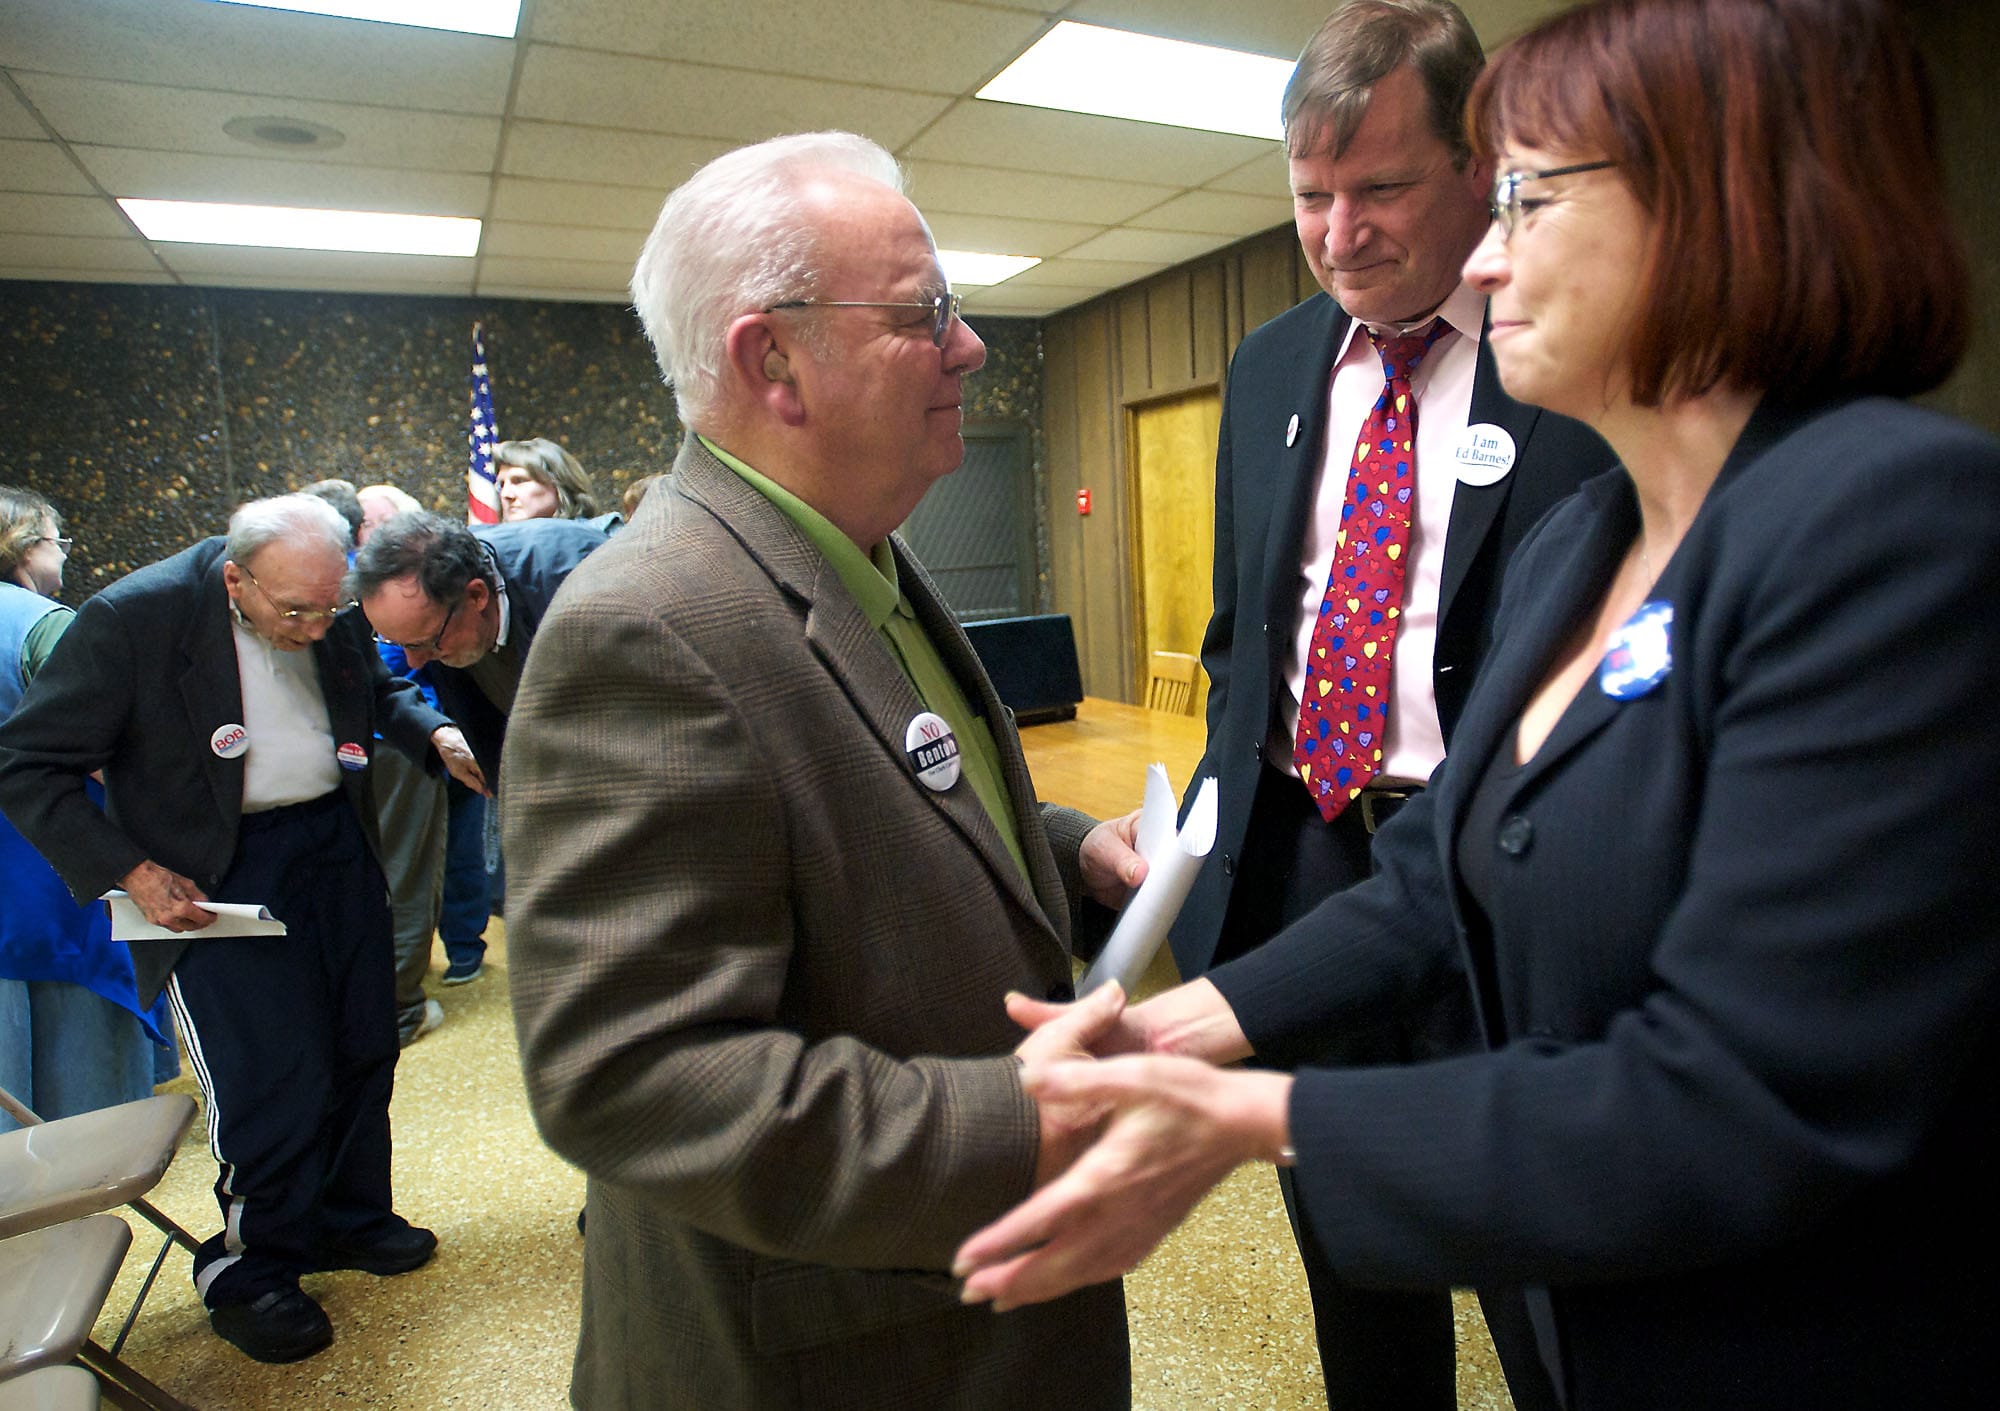 Ed Barnes, from left, Craig Pridemore and Kelly Love Parker congratulate each other after the Clark County Democrats selected and ranked them in March as their top three candidates in the order of Pridemore, Parker and Barnes, to fill the commissioner seat vacated by Steve Stuart.